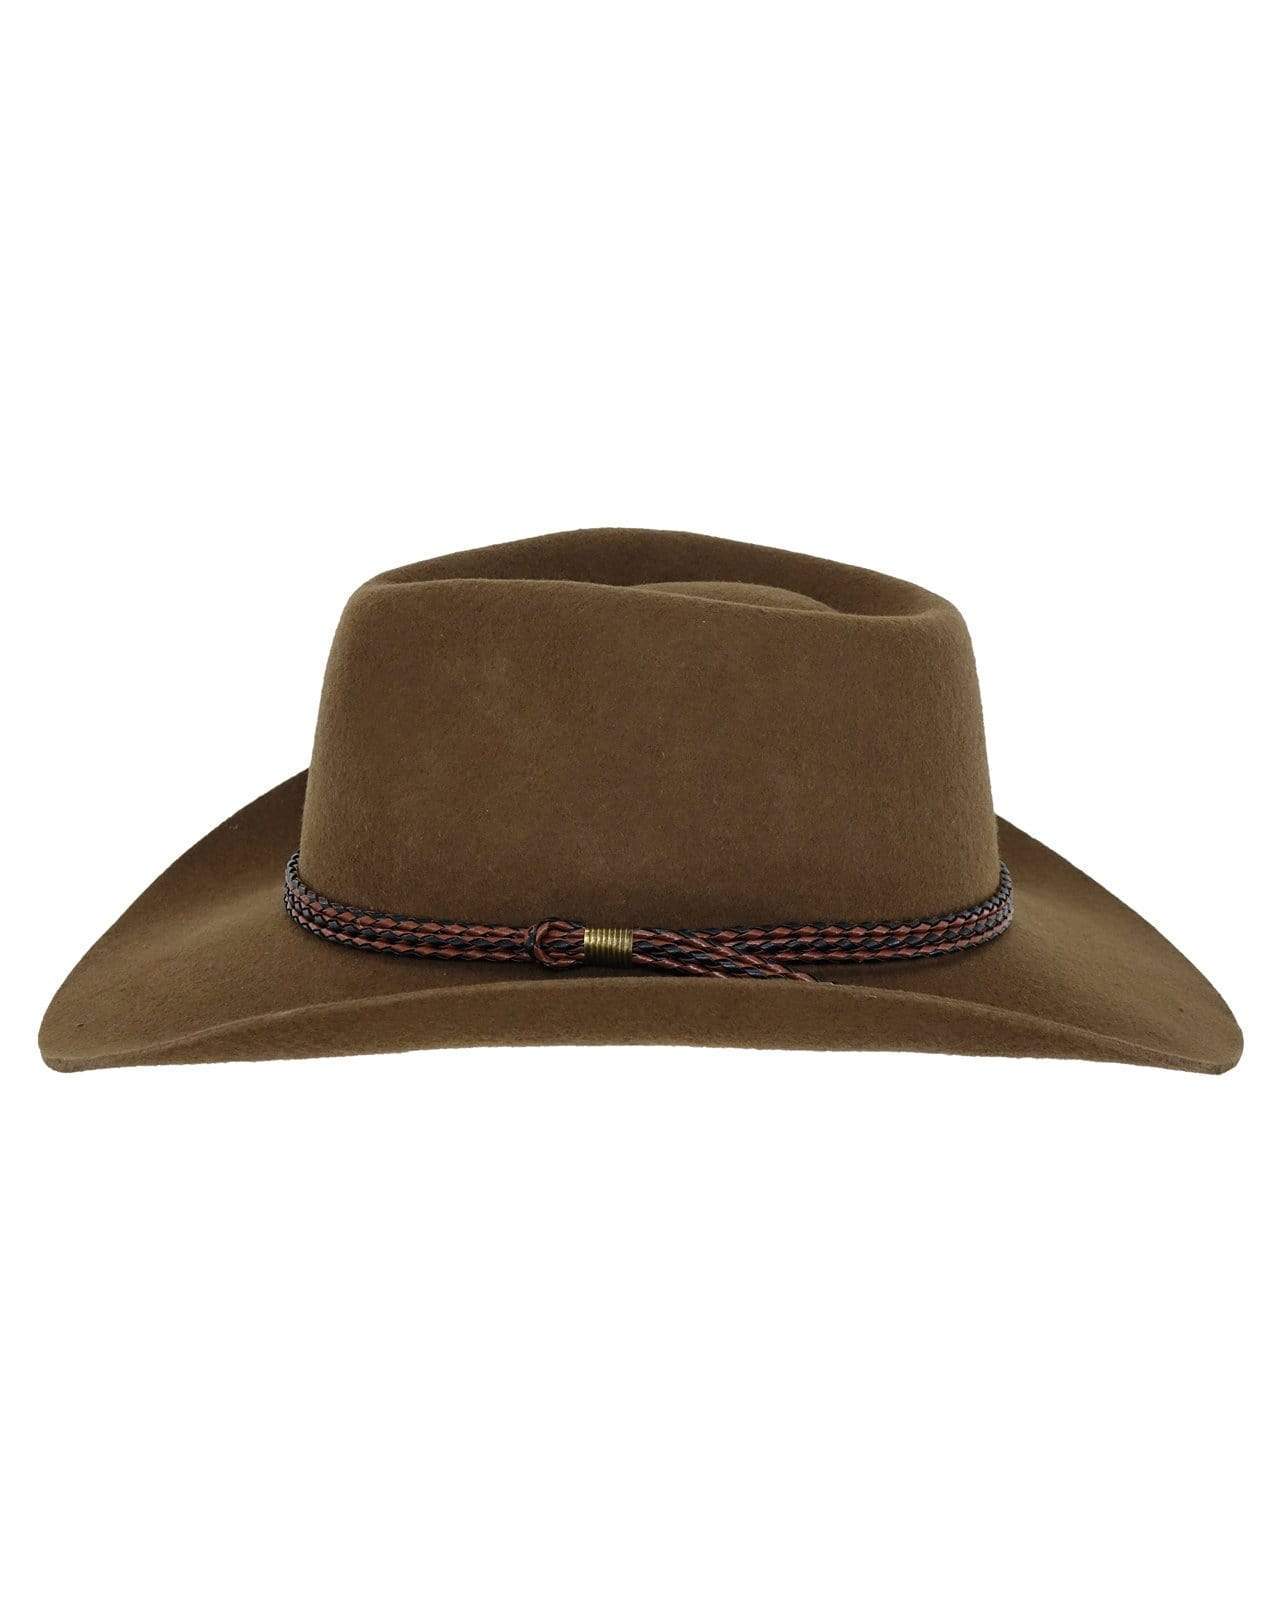 Outback Trading Company Forbes Hats